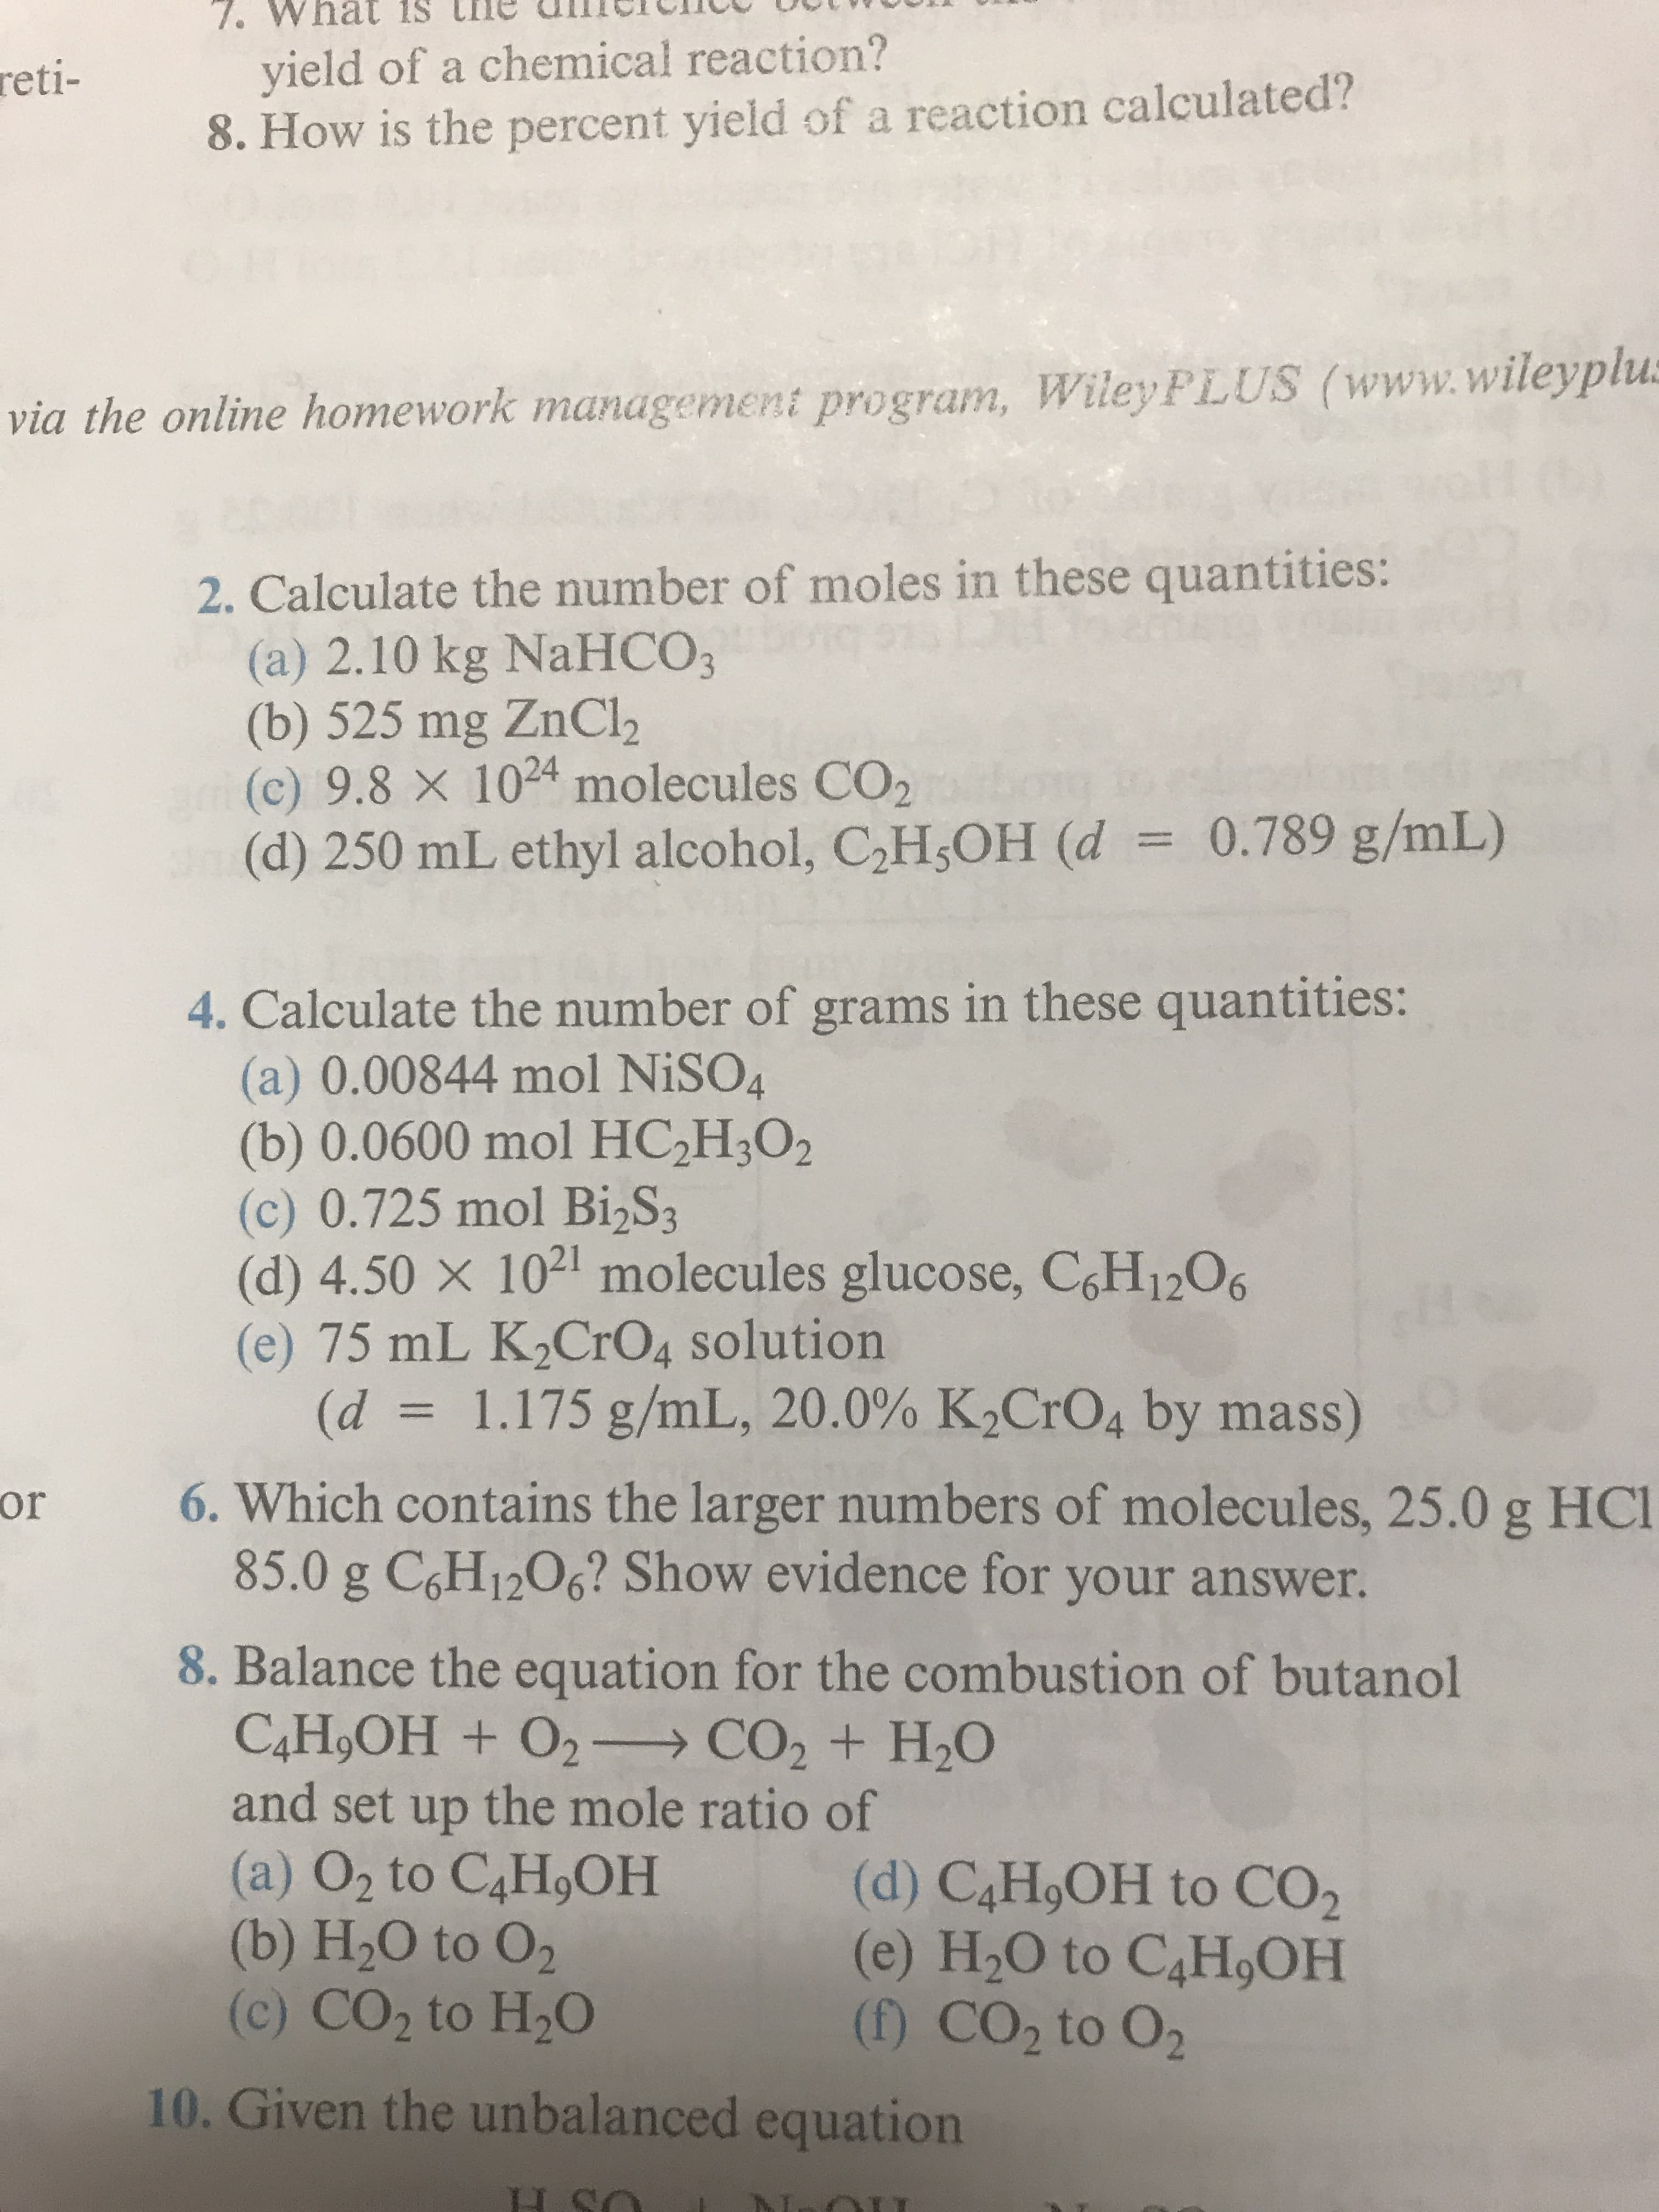 Wh
yield of a chemical reaction?
8. How is the percent yield of a reaction calculated?
reti
via the online homework management program, Wiley PLUS www.wileyplu
2. Calculate the number of moles in these quantities:
(a) 2.10 kg NaHCO3
(b) 525 mg ZnCl2
(c) 9.8 × 1024 molecules CO2
(d) 250 mL ethyl alcohol, C2H3OH (d = 0.789 g/mL)
4. Calculate the number of grams in these quantities:
(a) 0.00844 mol NiSO4
(b) 0.0600 mol HC2H,O2
(c) 0.725 mol Bi2S3
(d) 4.50 x 1021 molecules glucose, CH1206
(e) 75 mL K2CrO4 solution
(d-_ 1.175 g/mL, 20.0% K2CrO4 by mass)
or 6. Which contains the larger numbers of molecules, 25.0 g HCl
85.0 g C,H1206? Show evidence for your answer.
8. Balance the equation for the combustion of butanol
and set up the mole ratio of
(a) O2 to C4HOH(d) C4HoOH to CO2
(b) H20 to 02
(c) CO2 to H20
(e) H20 to C4H,OH
(f) CO2 to 02
10. Given the unbalanced equation
